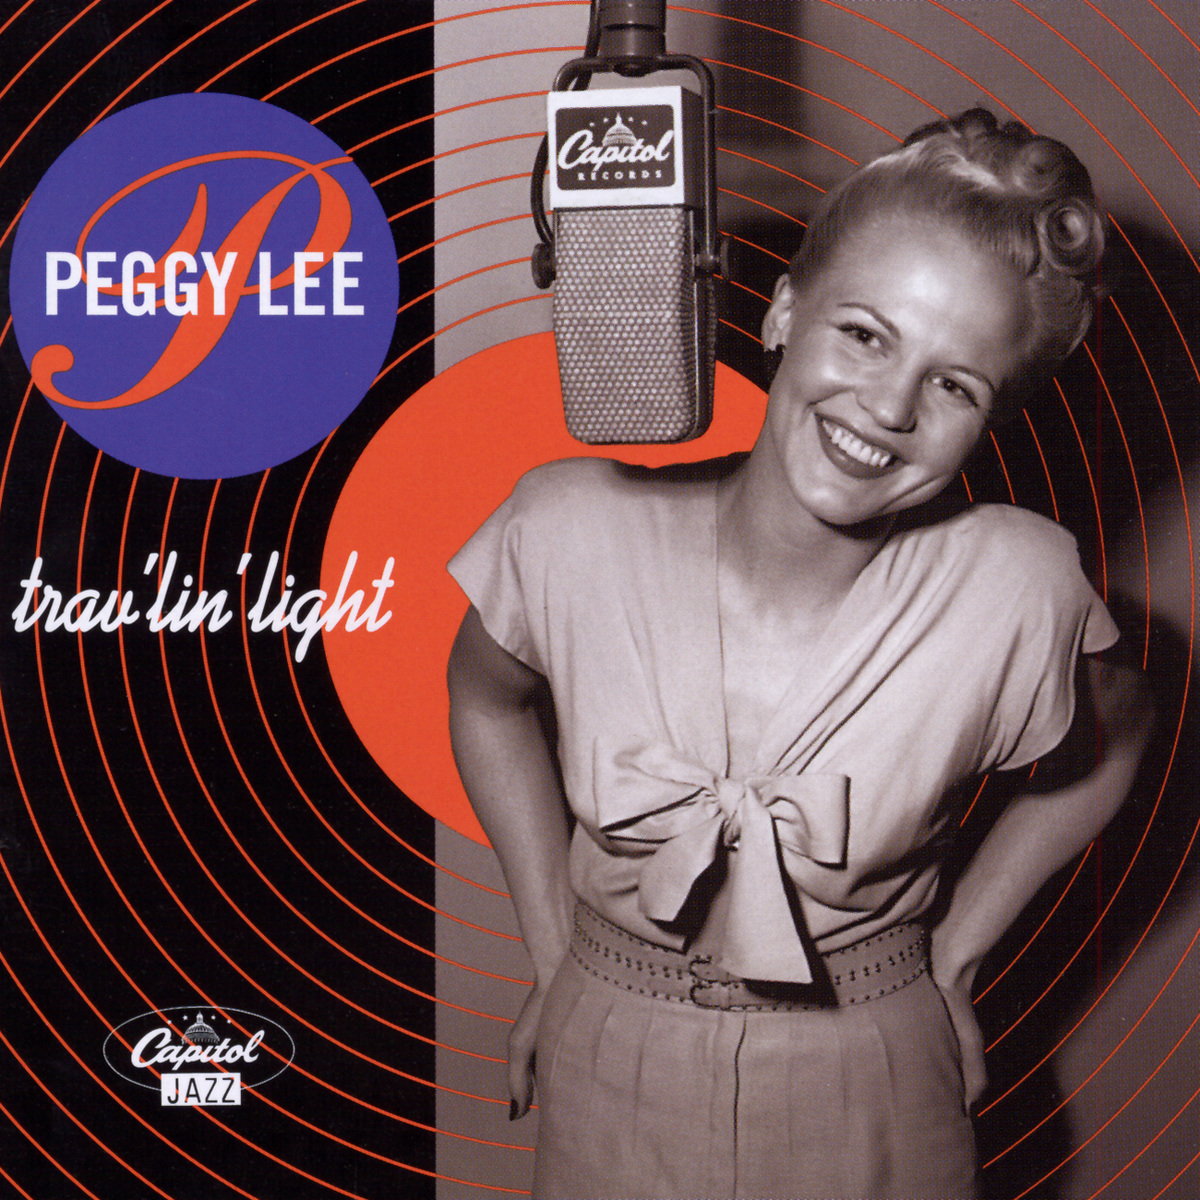 Peggy Lee - Discography - 320kbps Bitrate.